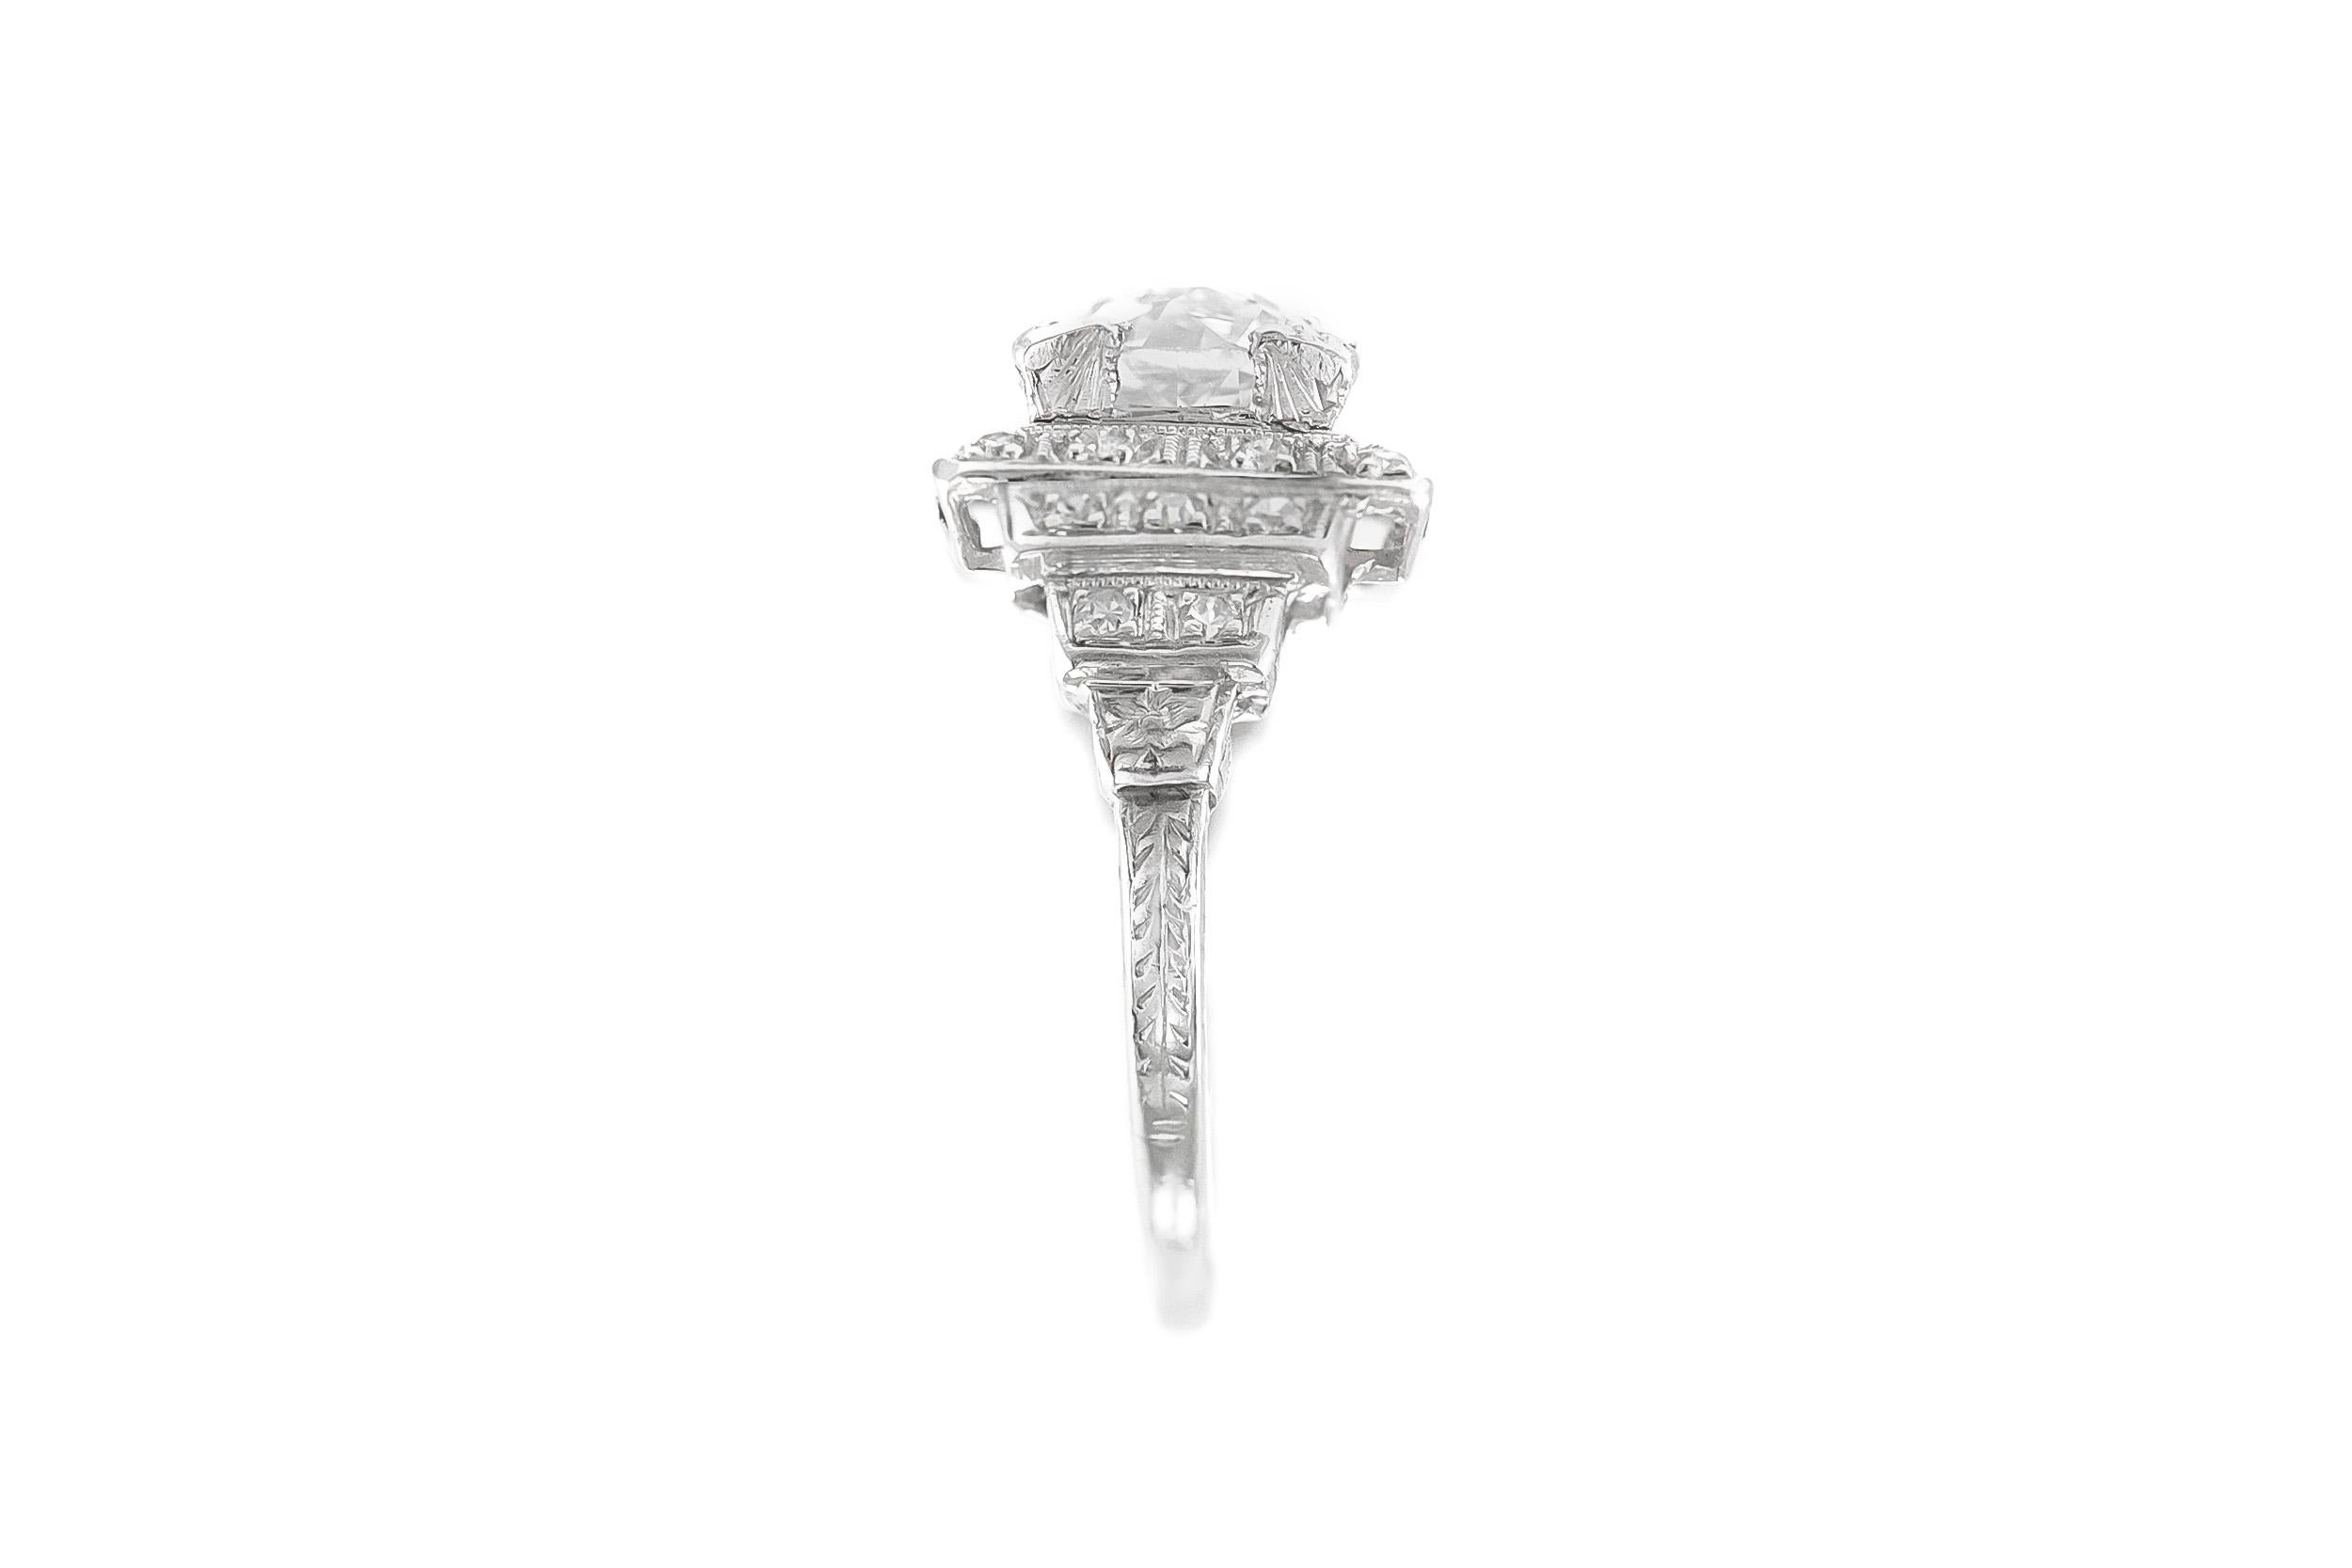 The beautiful ring is finely crafted in platinum with center diamond weighing approximately total of 1.36 carat .
Color I    Clarity VS1
Circa 1930
Easy to resize